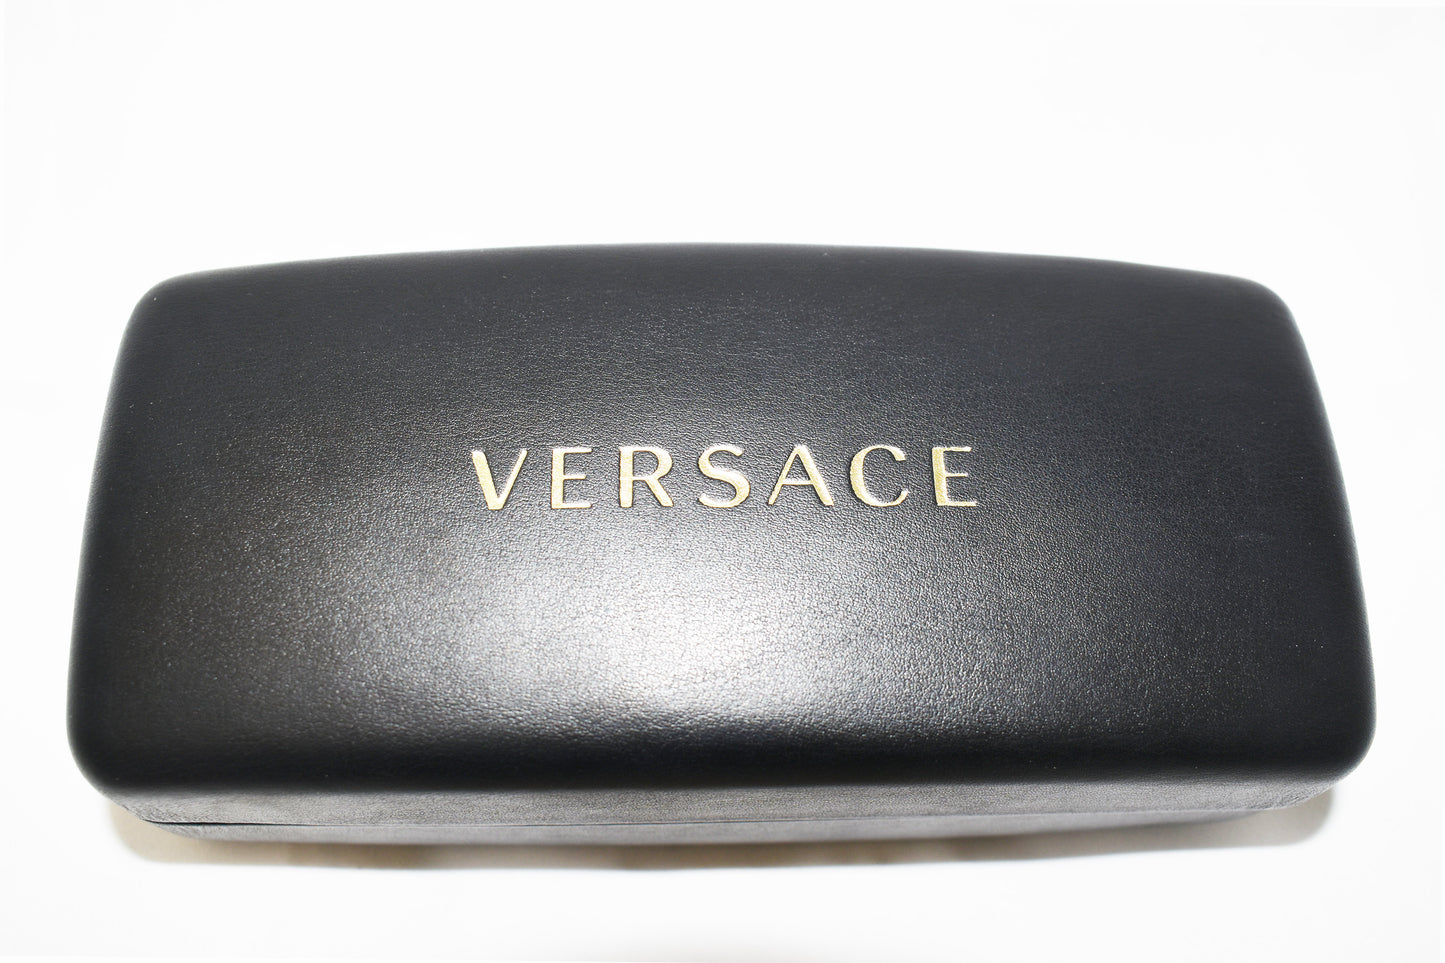 Versace Money Green Sunglasses with Gold Grommets